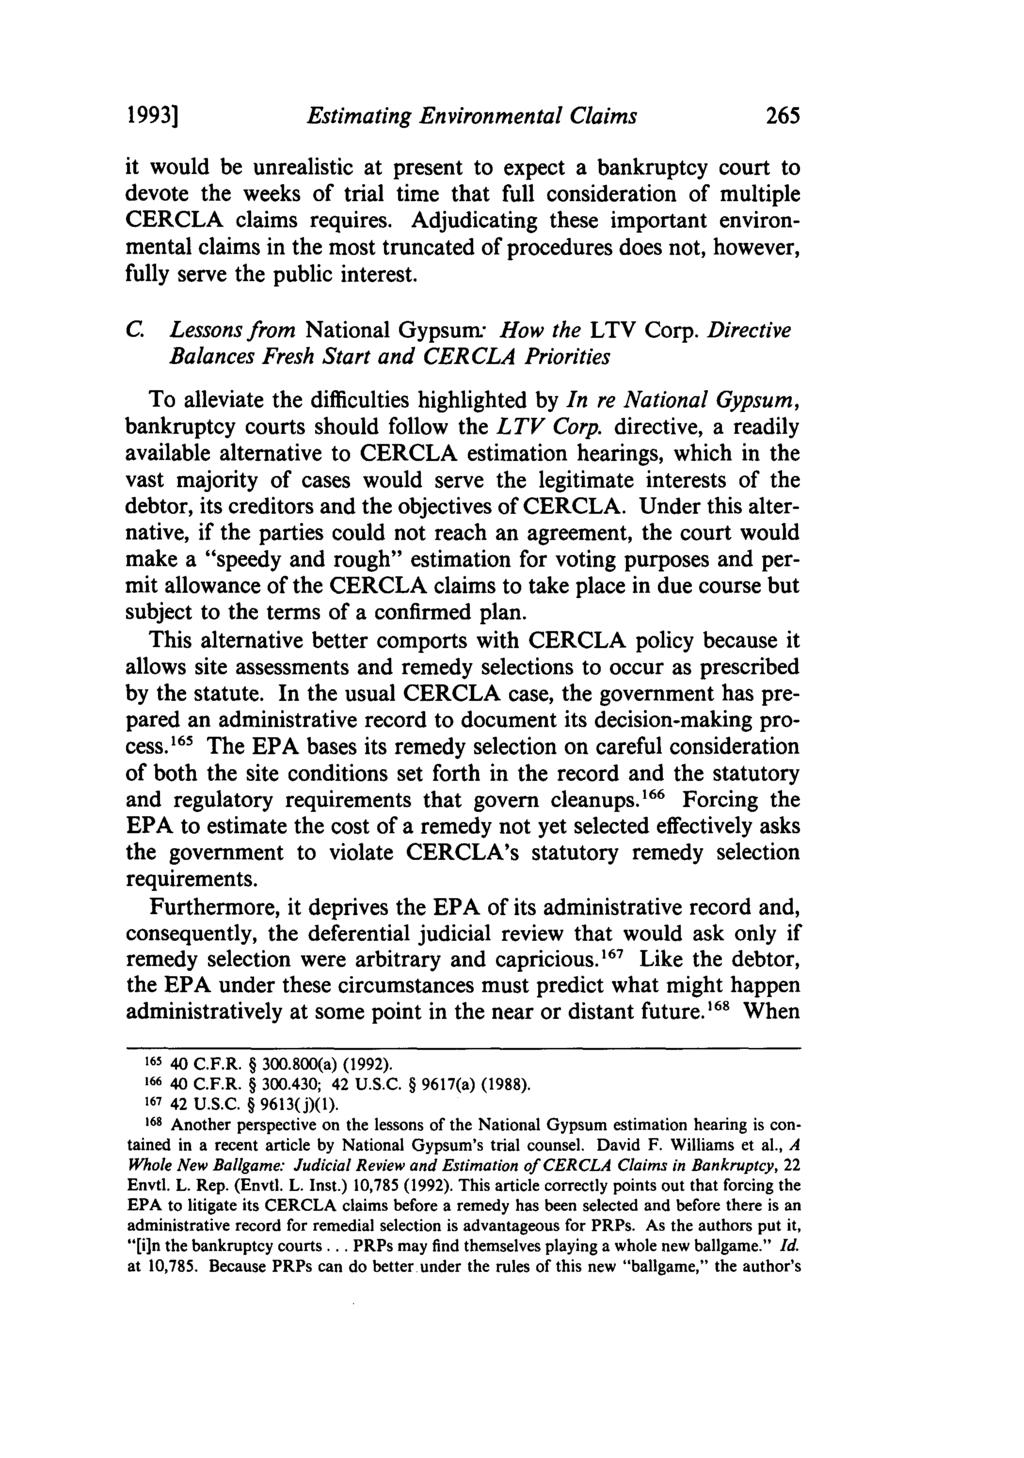 1993] Estimating Environmental Claims it would be unrealistic at present to expect a bankruptcy court to devote the weeks of trial time that full consideration of multiple CERCLA claims requires.